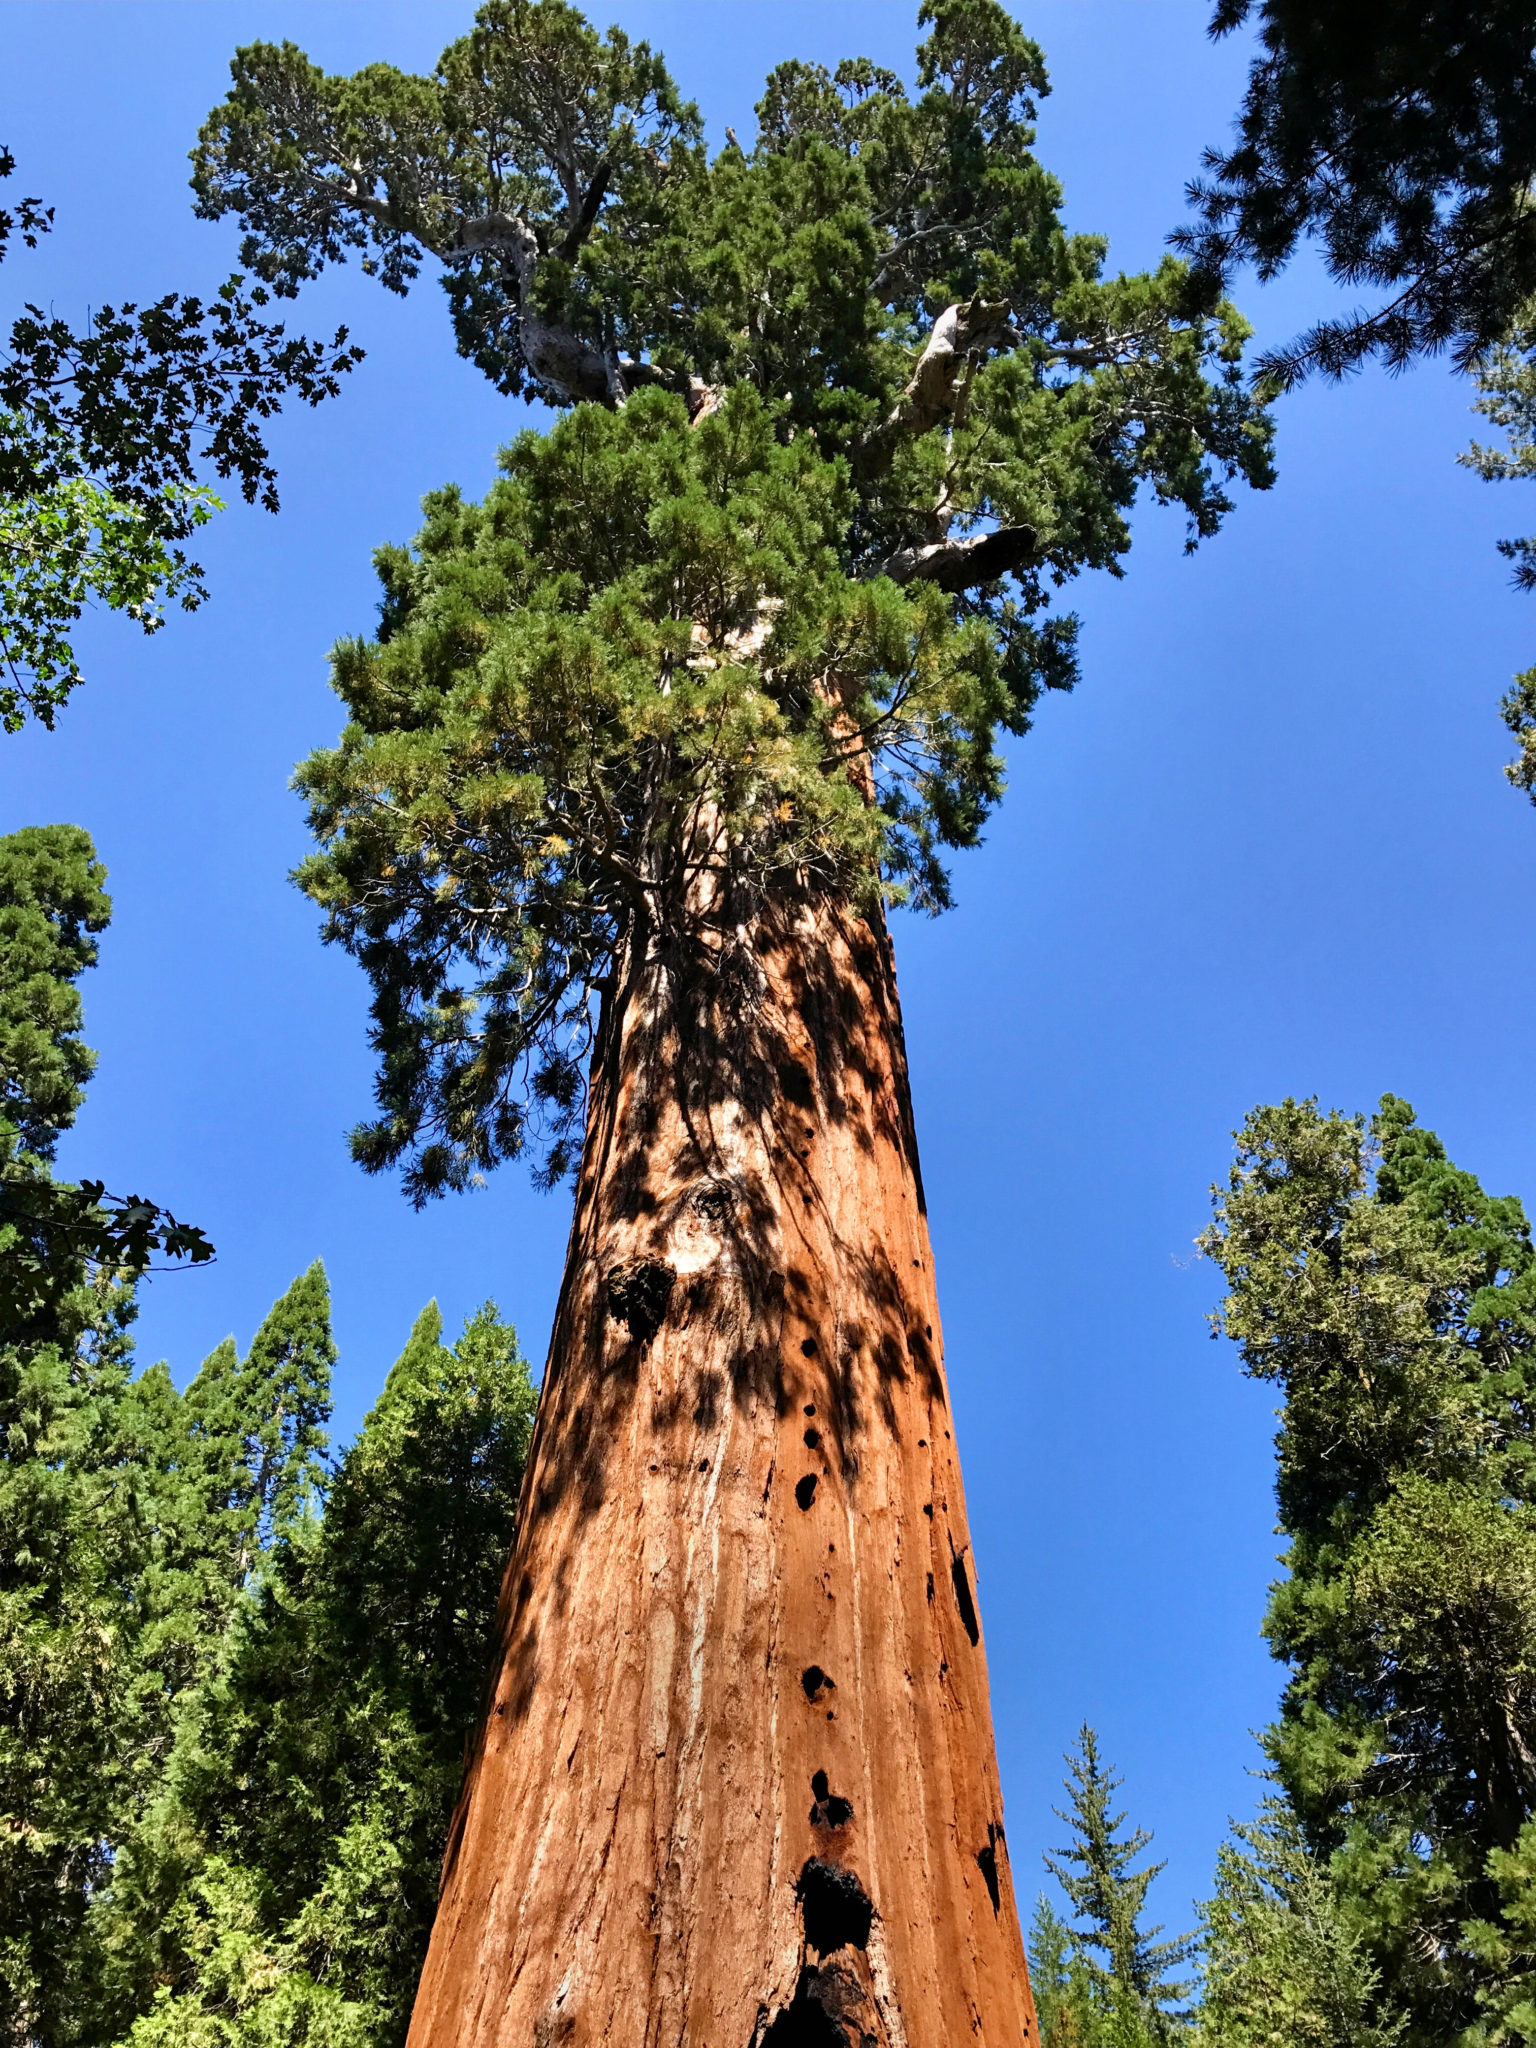 General Grant Tree in Kings Canyon